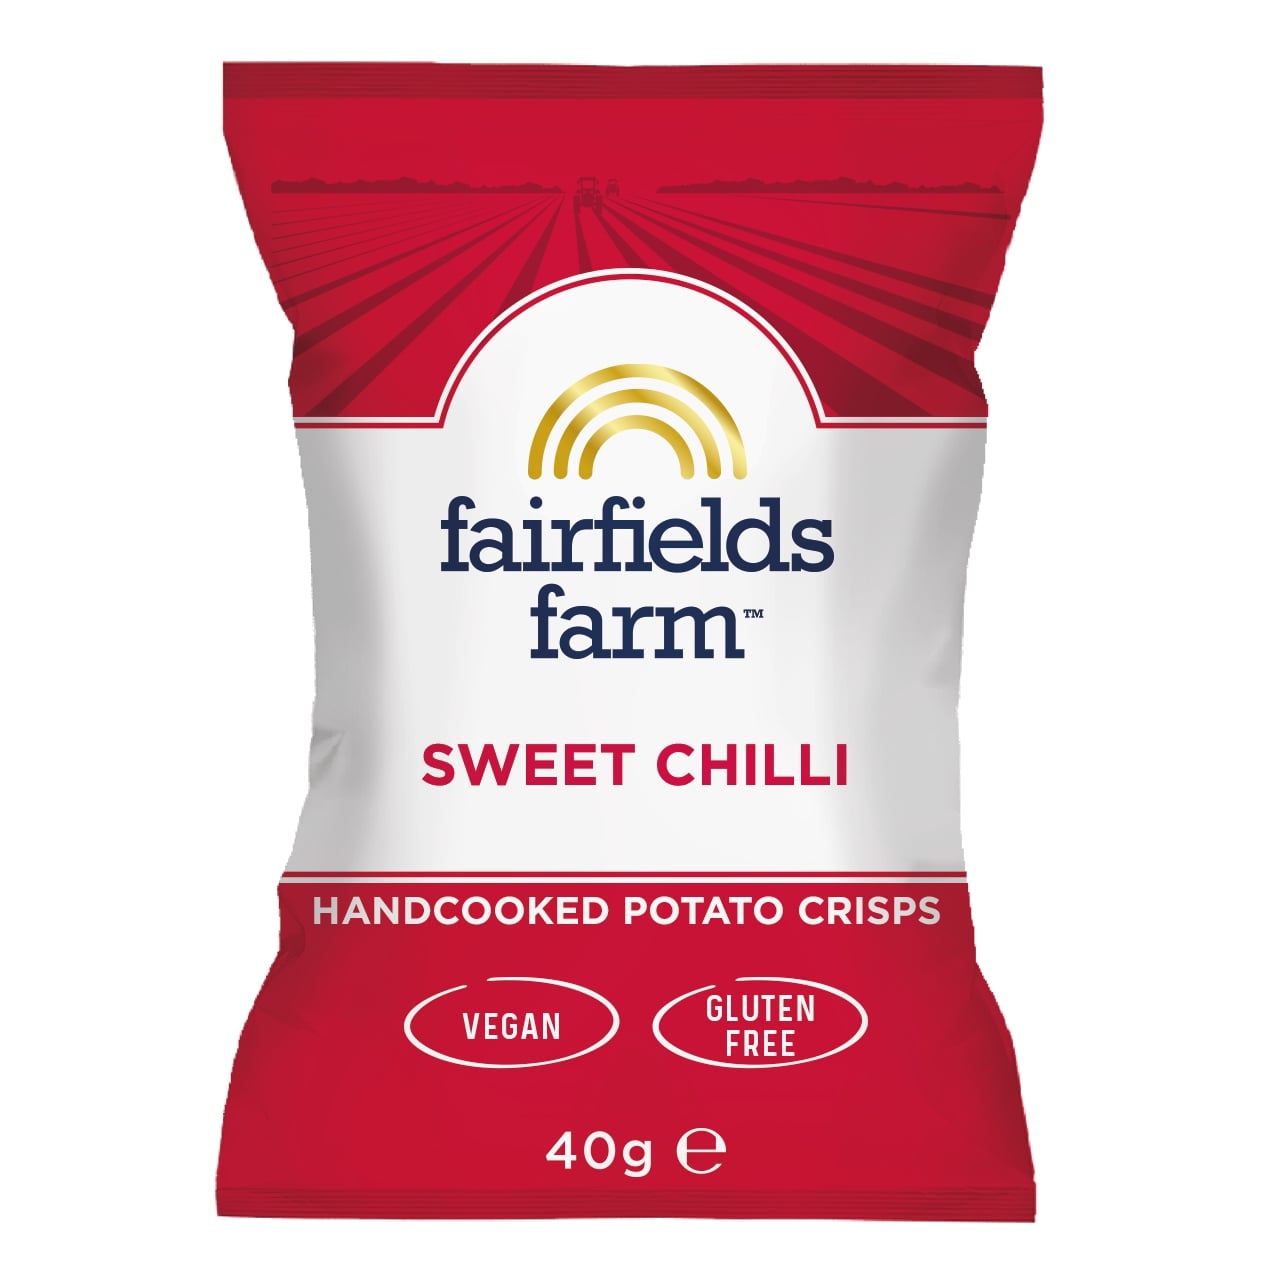 Sweet Chilli – 36 x 40g bags